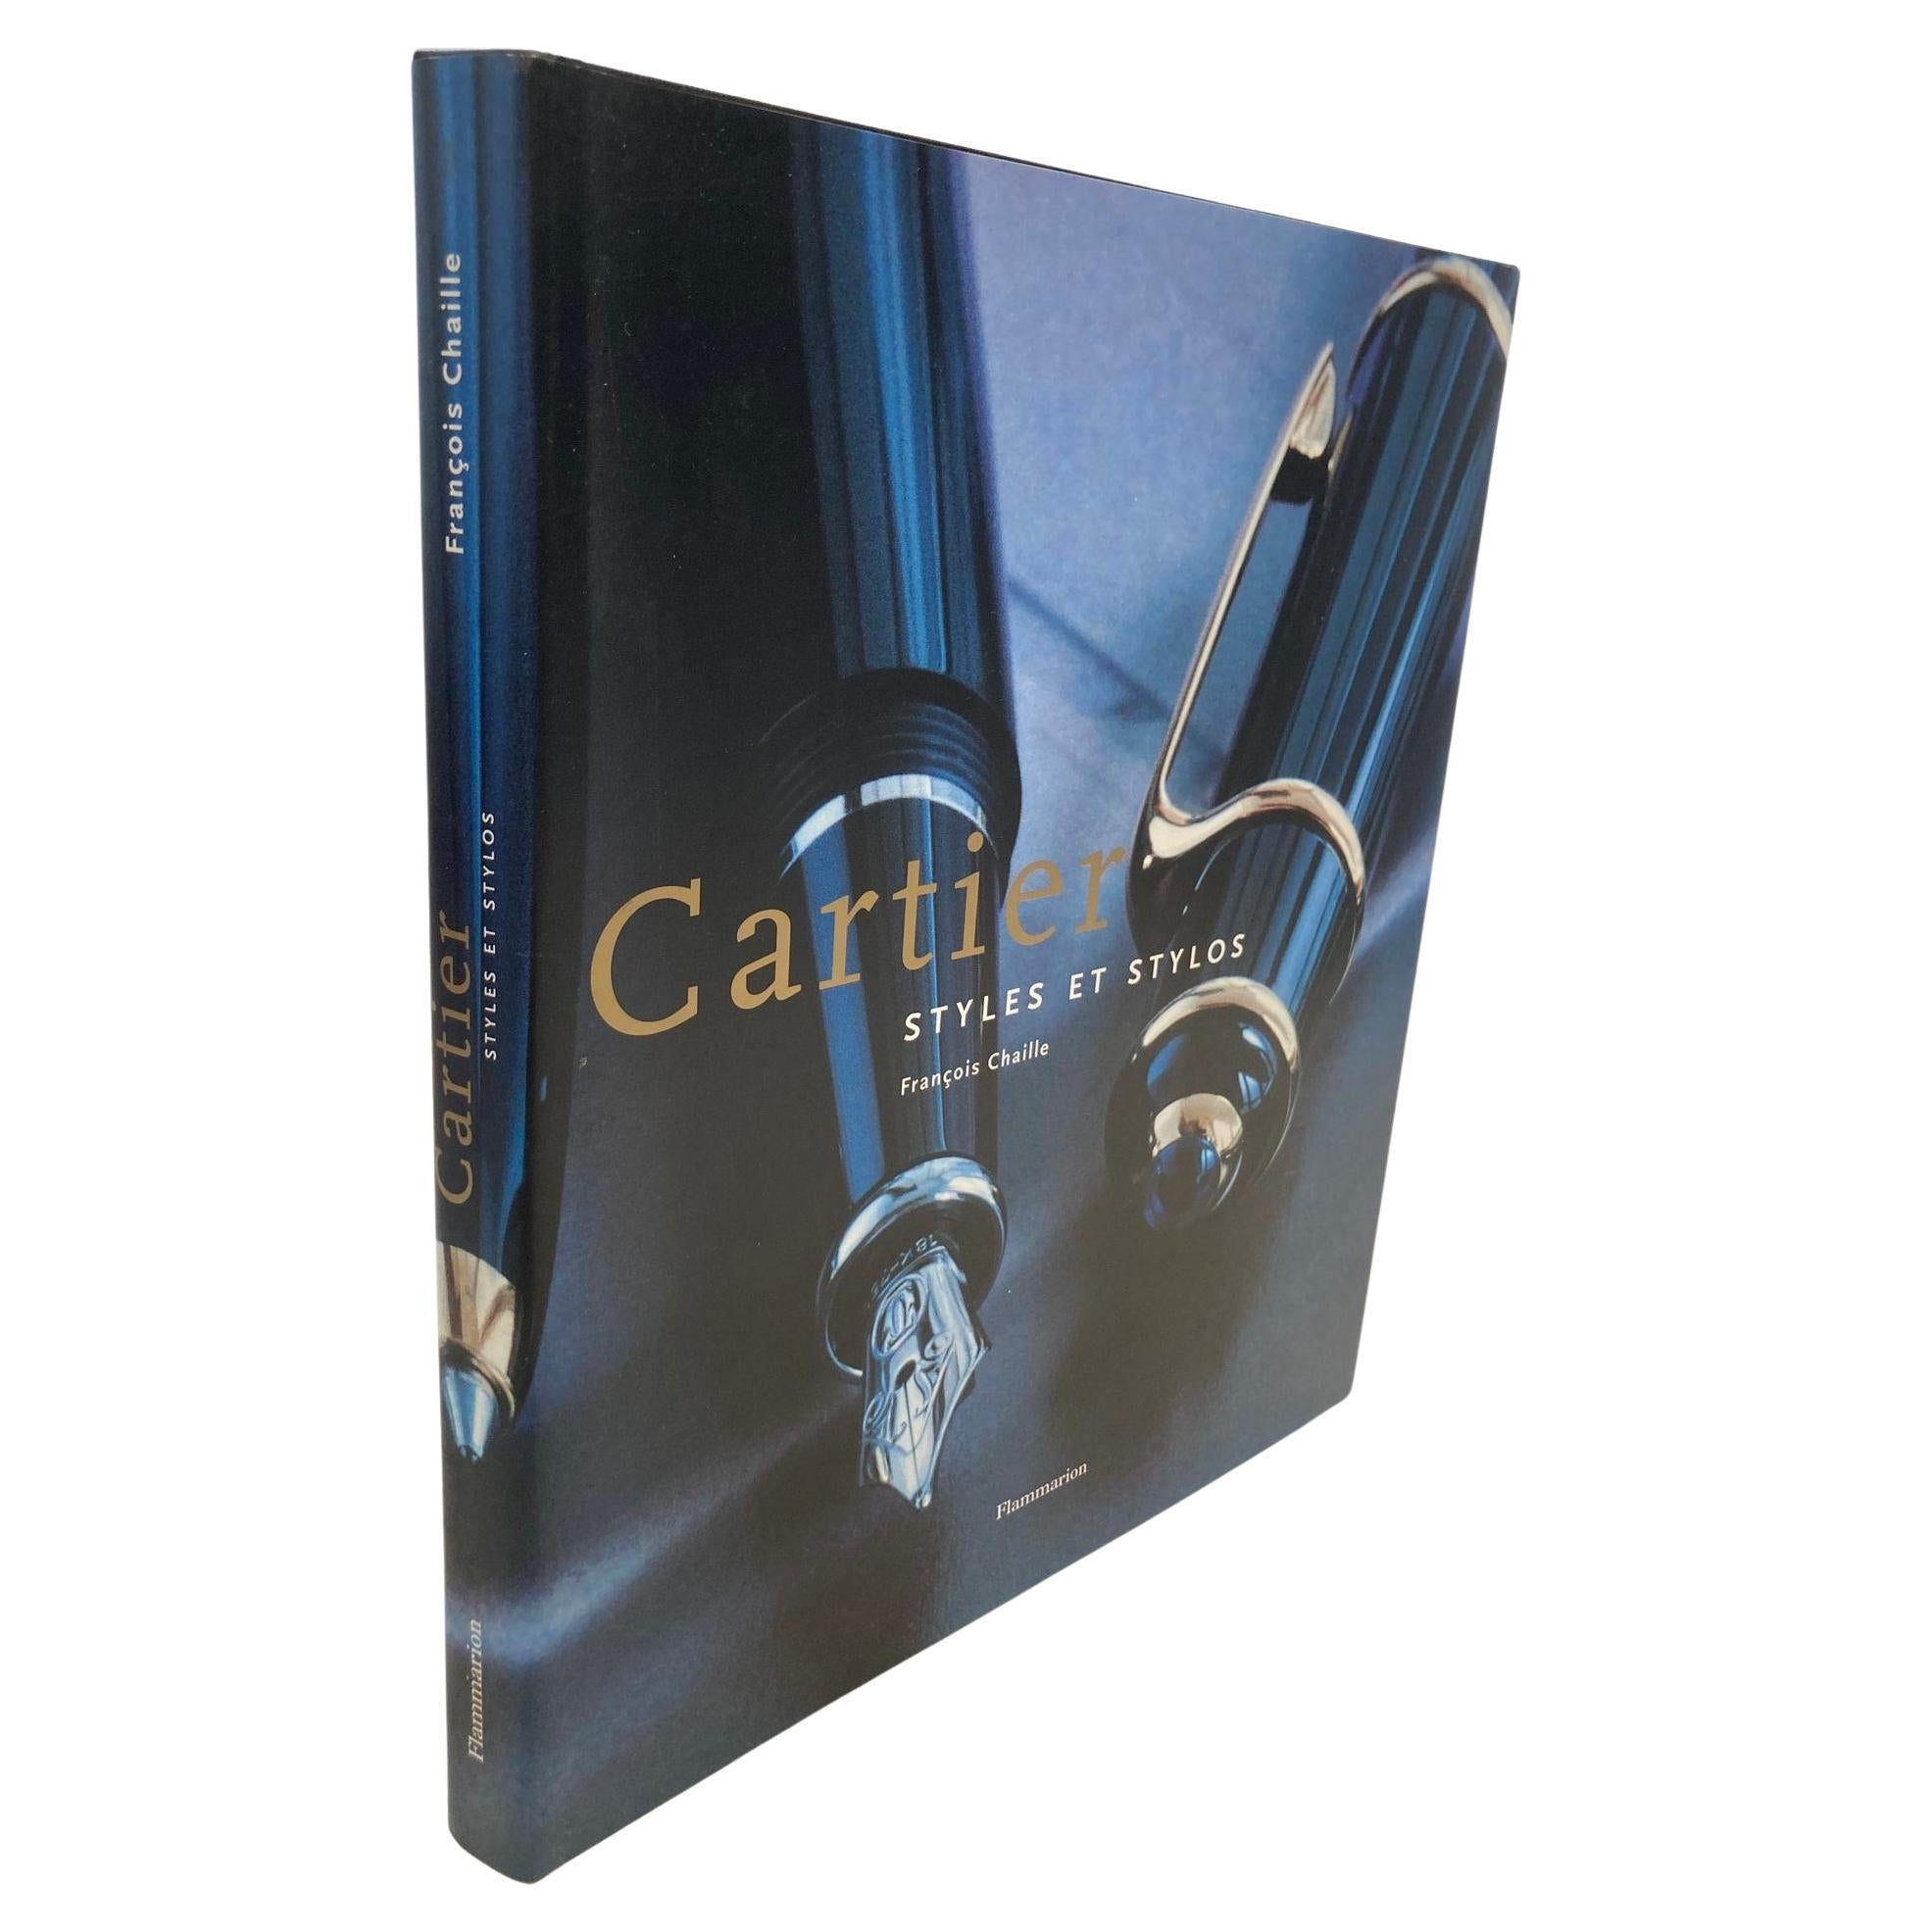 Cartier Styles et Stylos Hardcover French Edition, Cartier Creative Writing